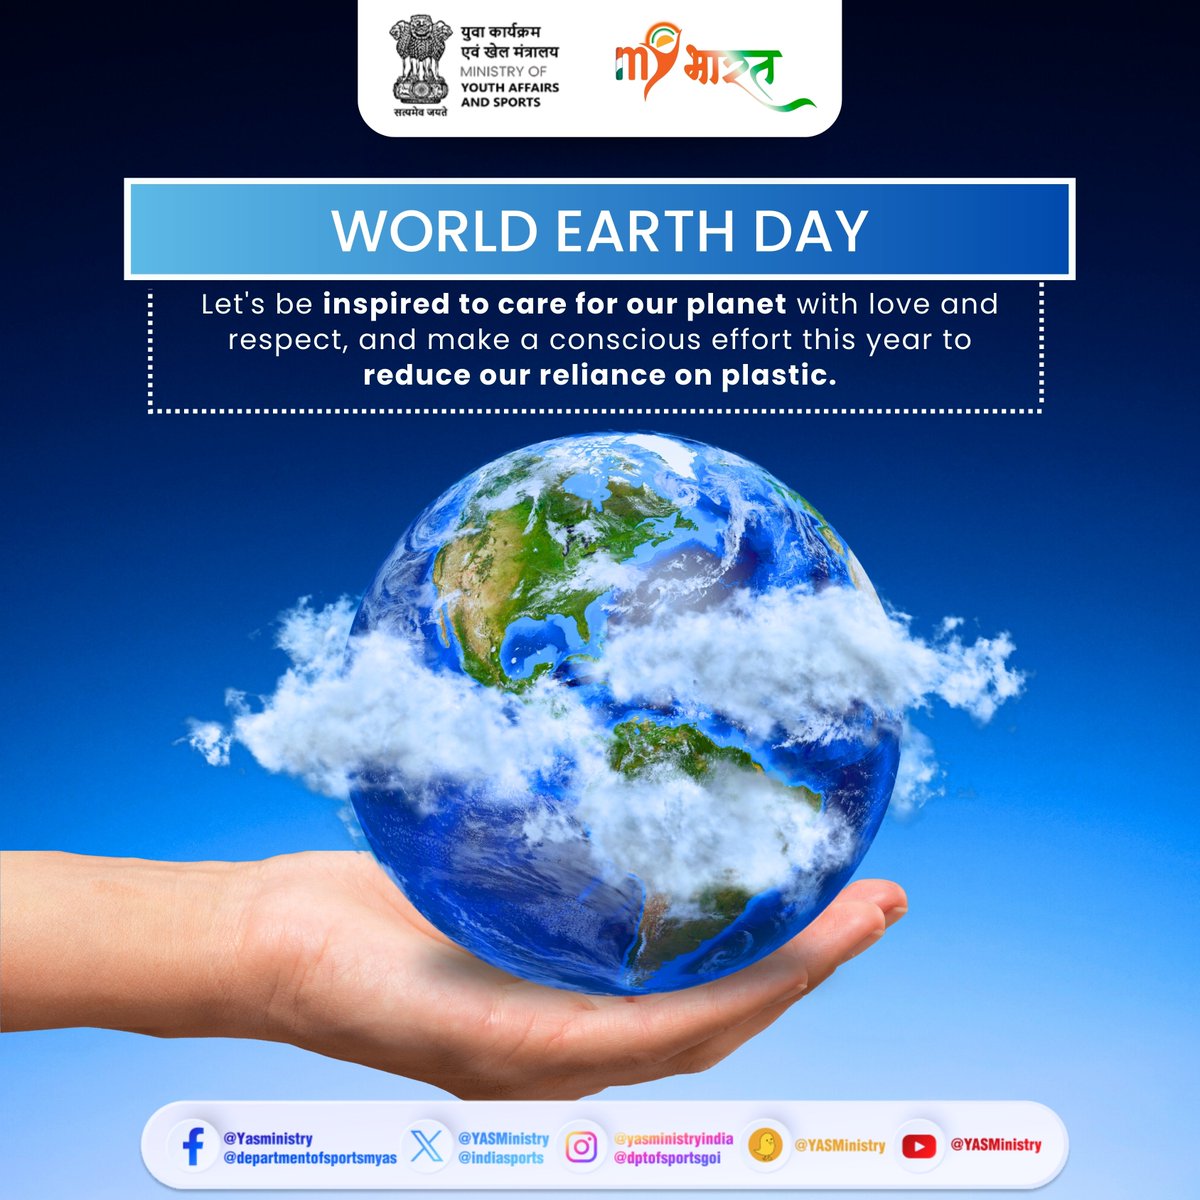 This #WorldEarthDay, let's ponder the parallels between the renewal of Mother Nature & the journey of motherhood, both embody the beauty of new beginnings, growth & nurturing care. Let’s give our only home the love & respect it deserves by reducing our reliance on plastic. 🌎